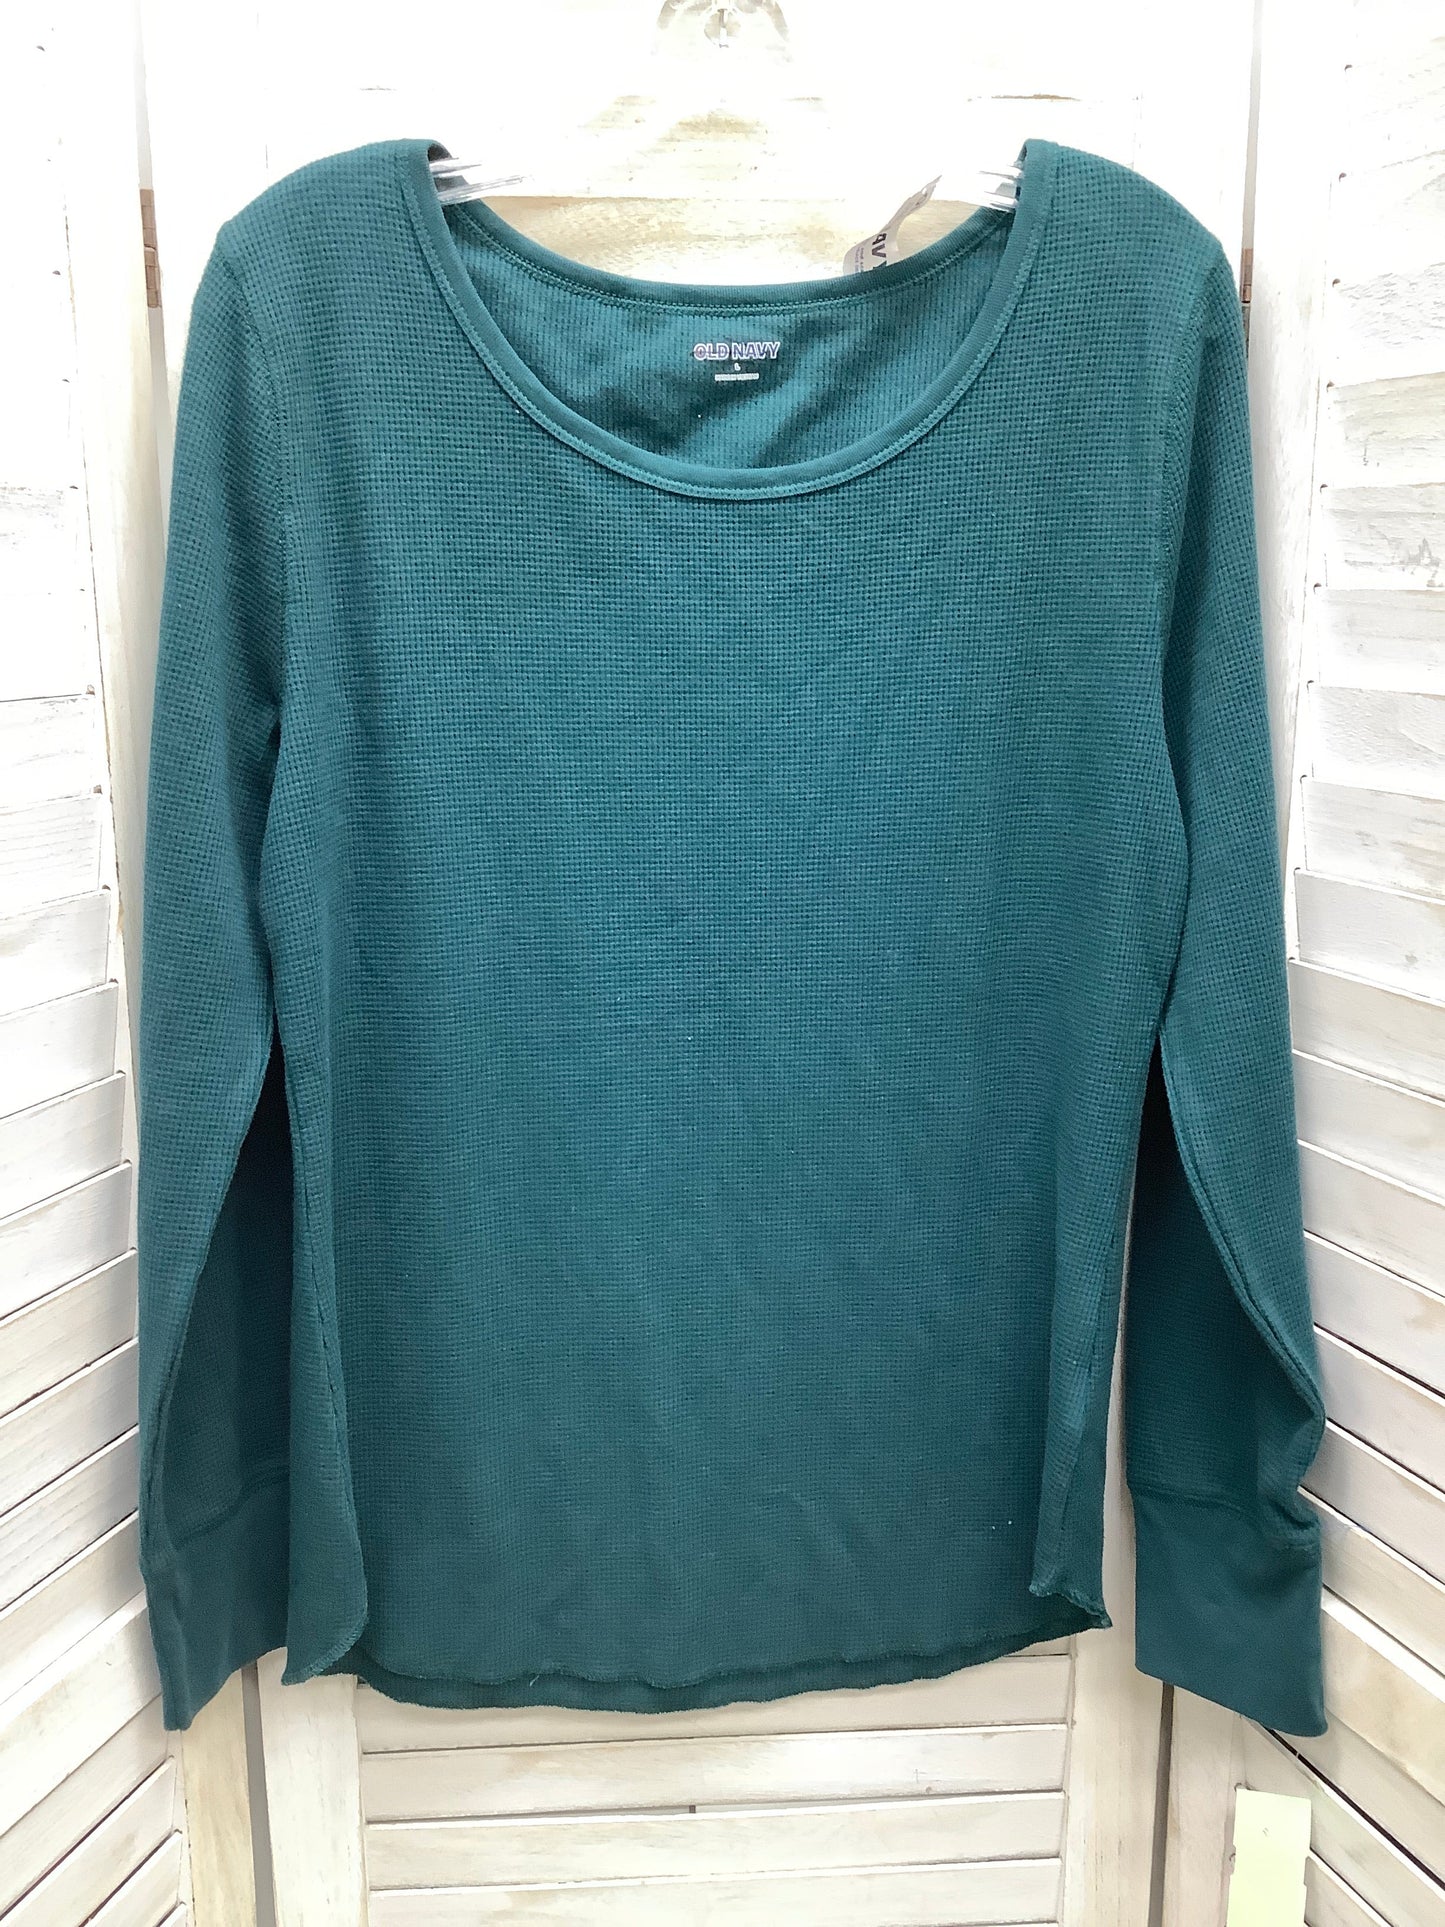 Teal Top Long Sleeve Basic Old Navy, Size L